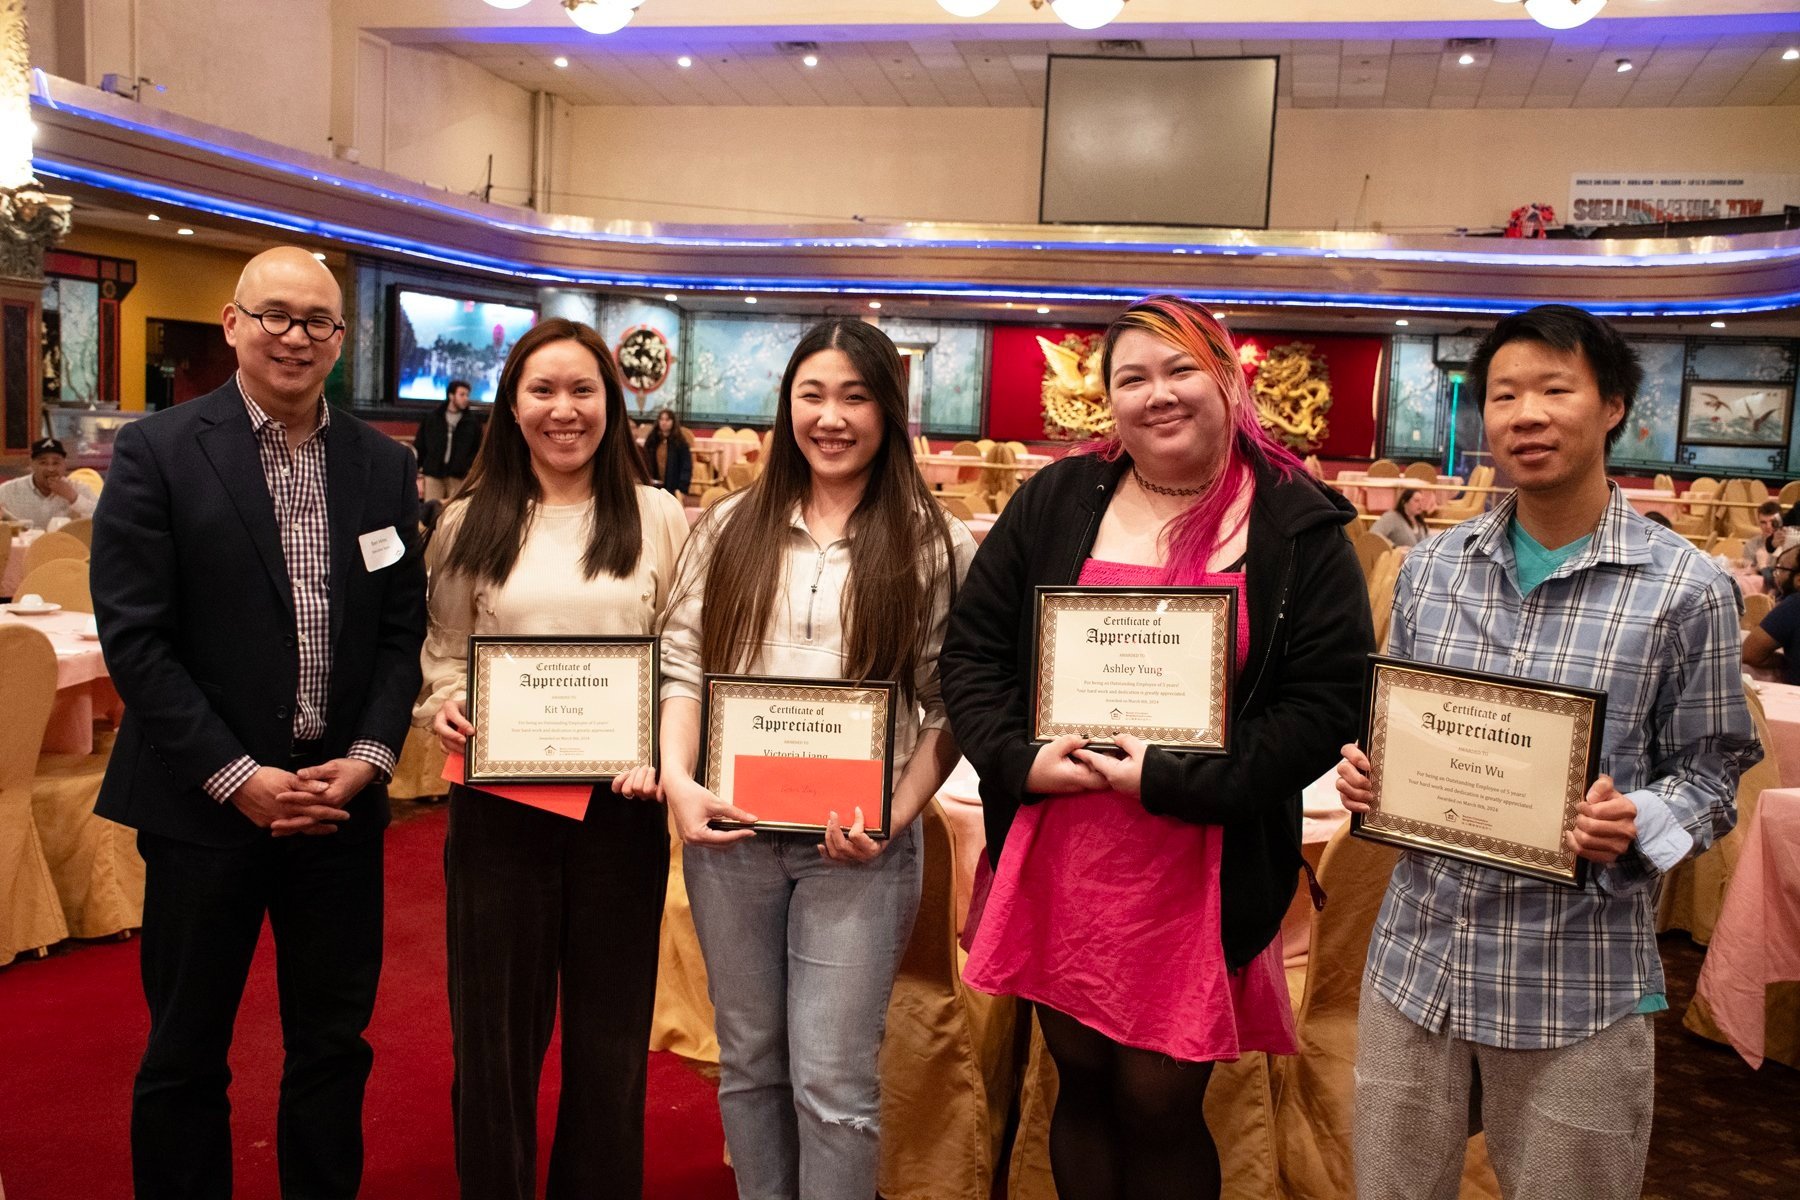 Kit Yung, Victoria Liang, Ashley Yung, and Kevin Wu receive 5 years of service awards